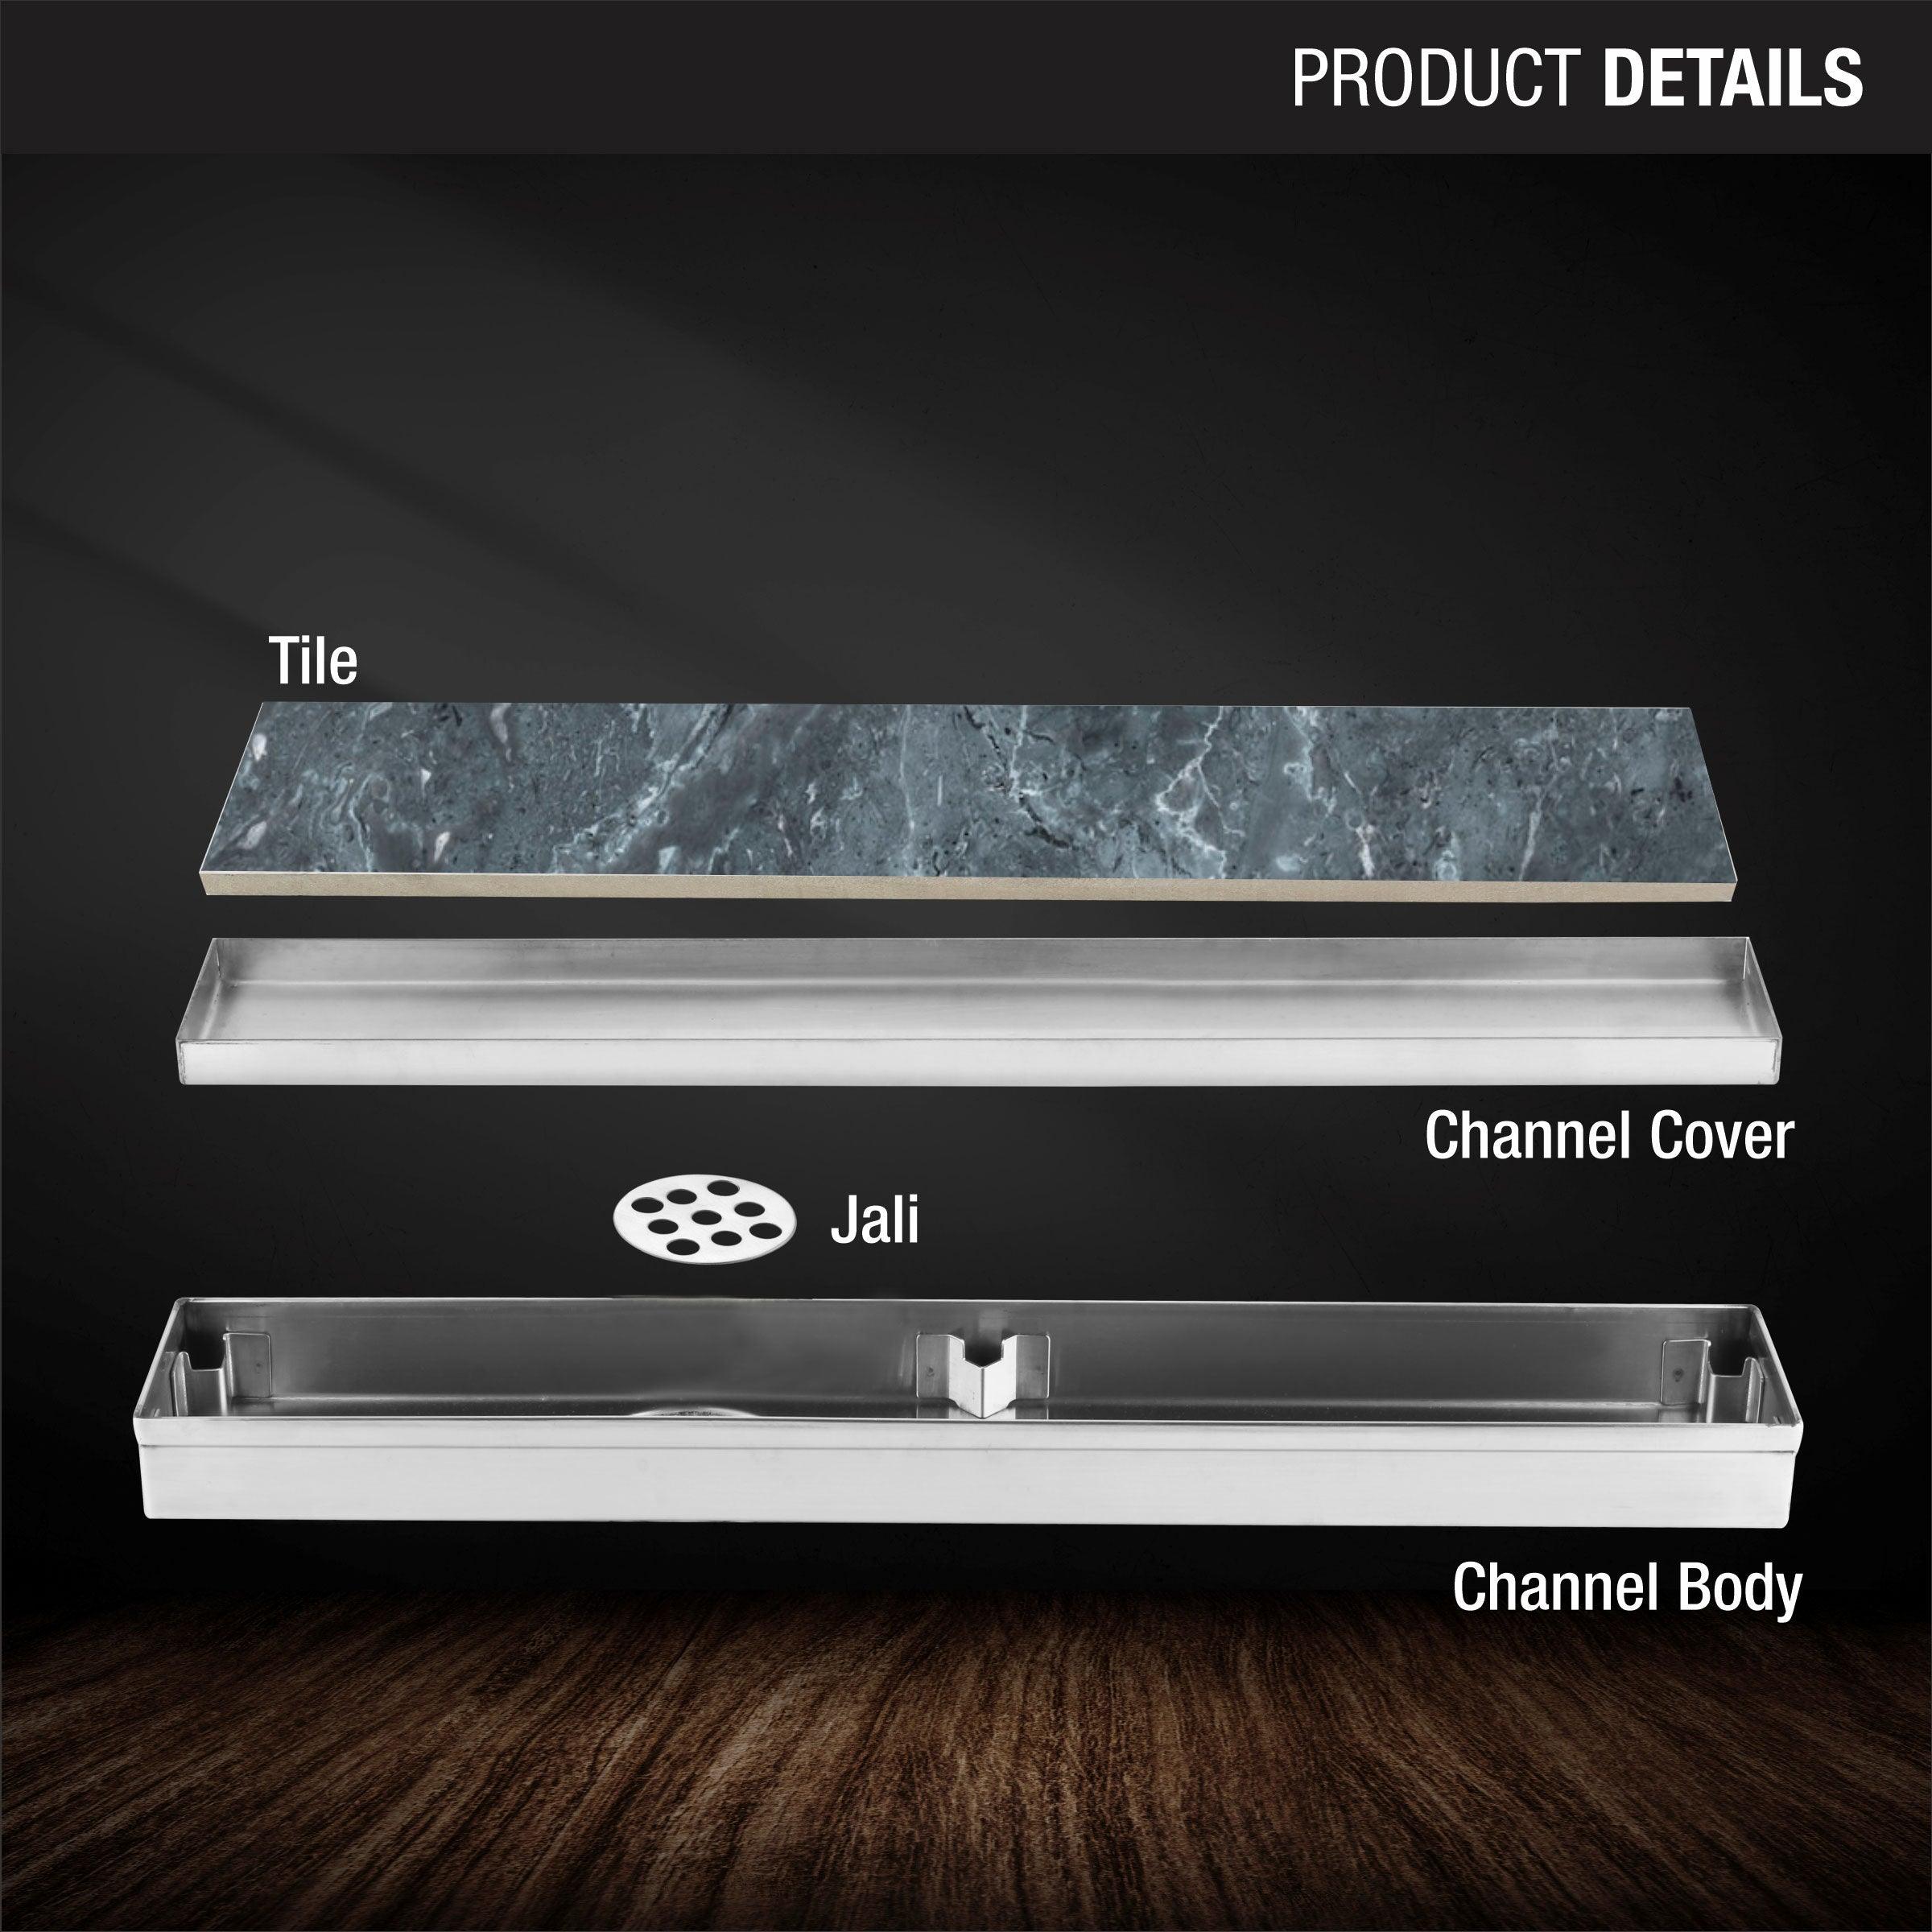 Tile Insert Shower Drain Channel (18 x 2 Inches) product details